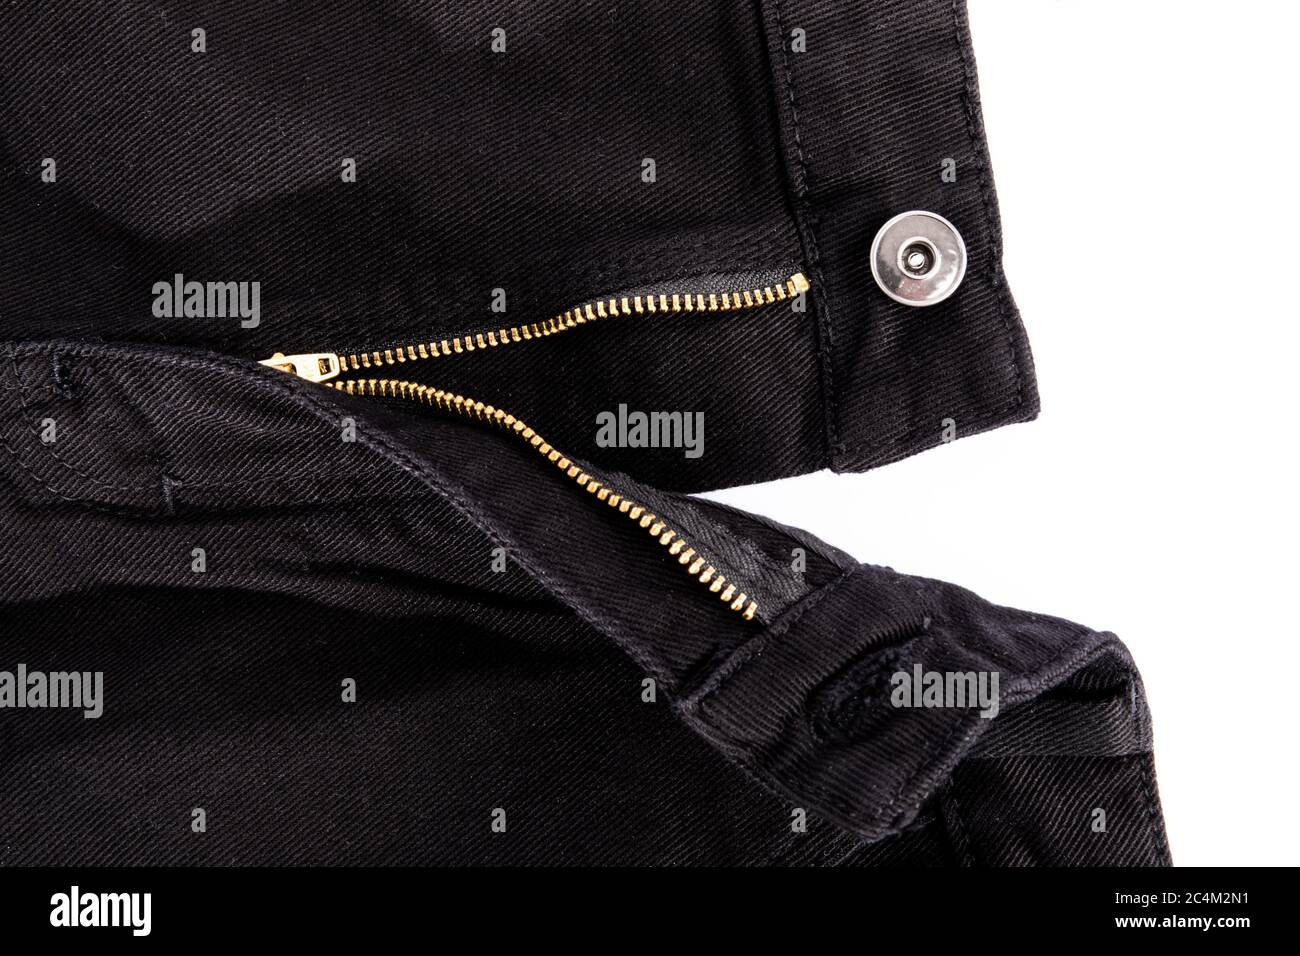 The open zipper of black denim jeans open on a white background Stock Photo